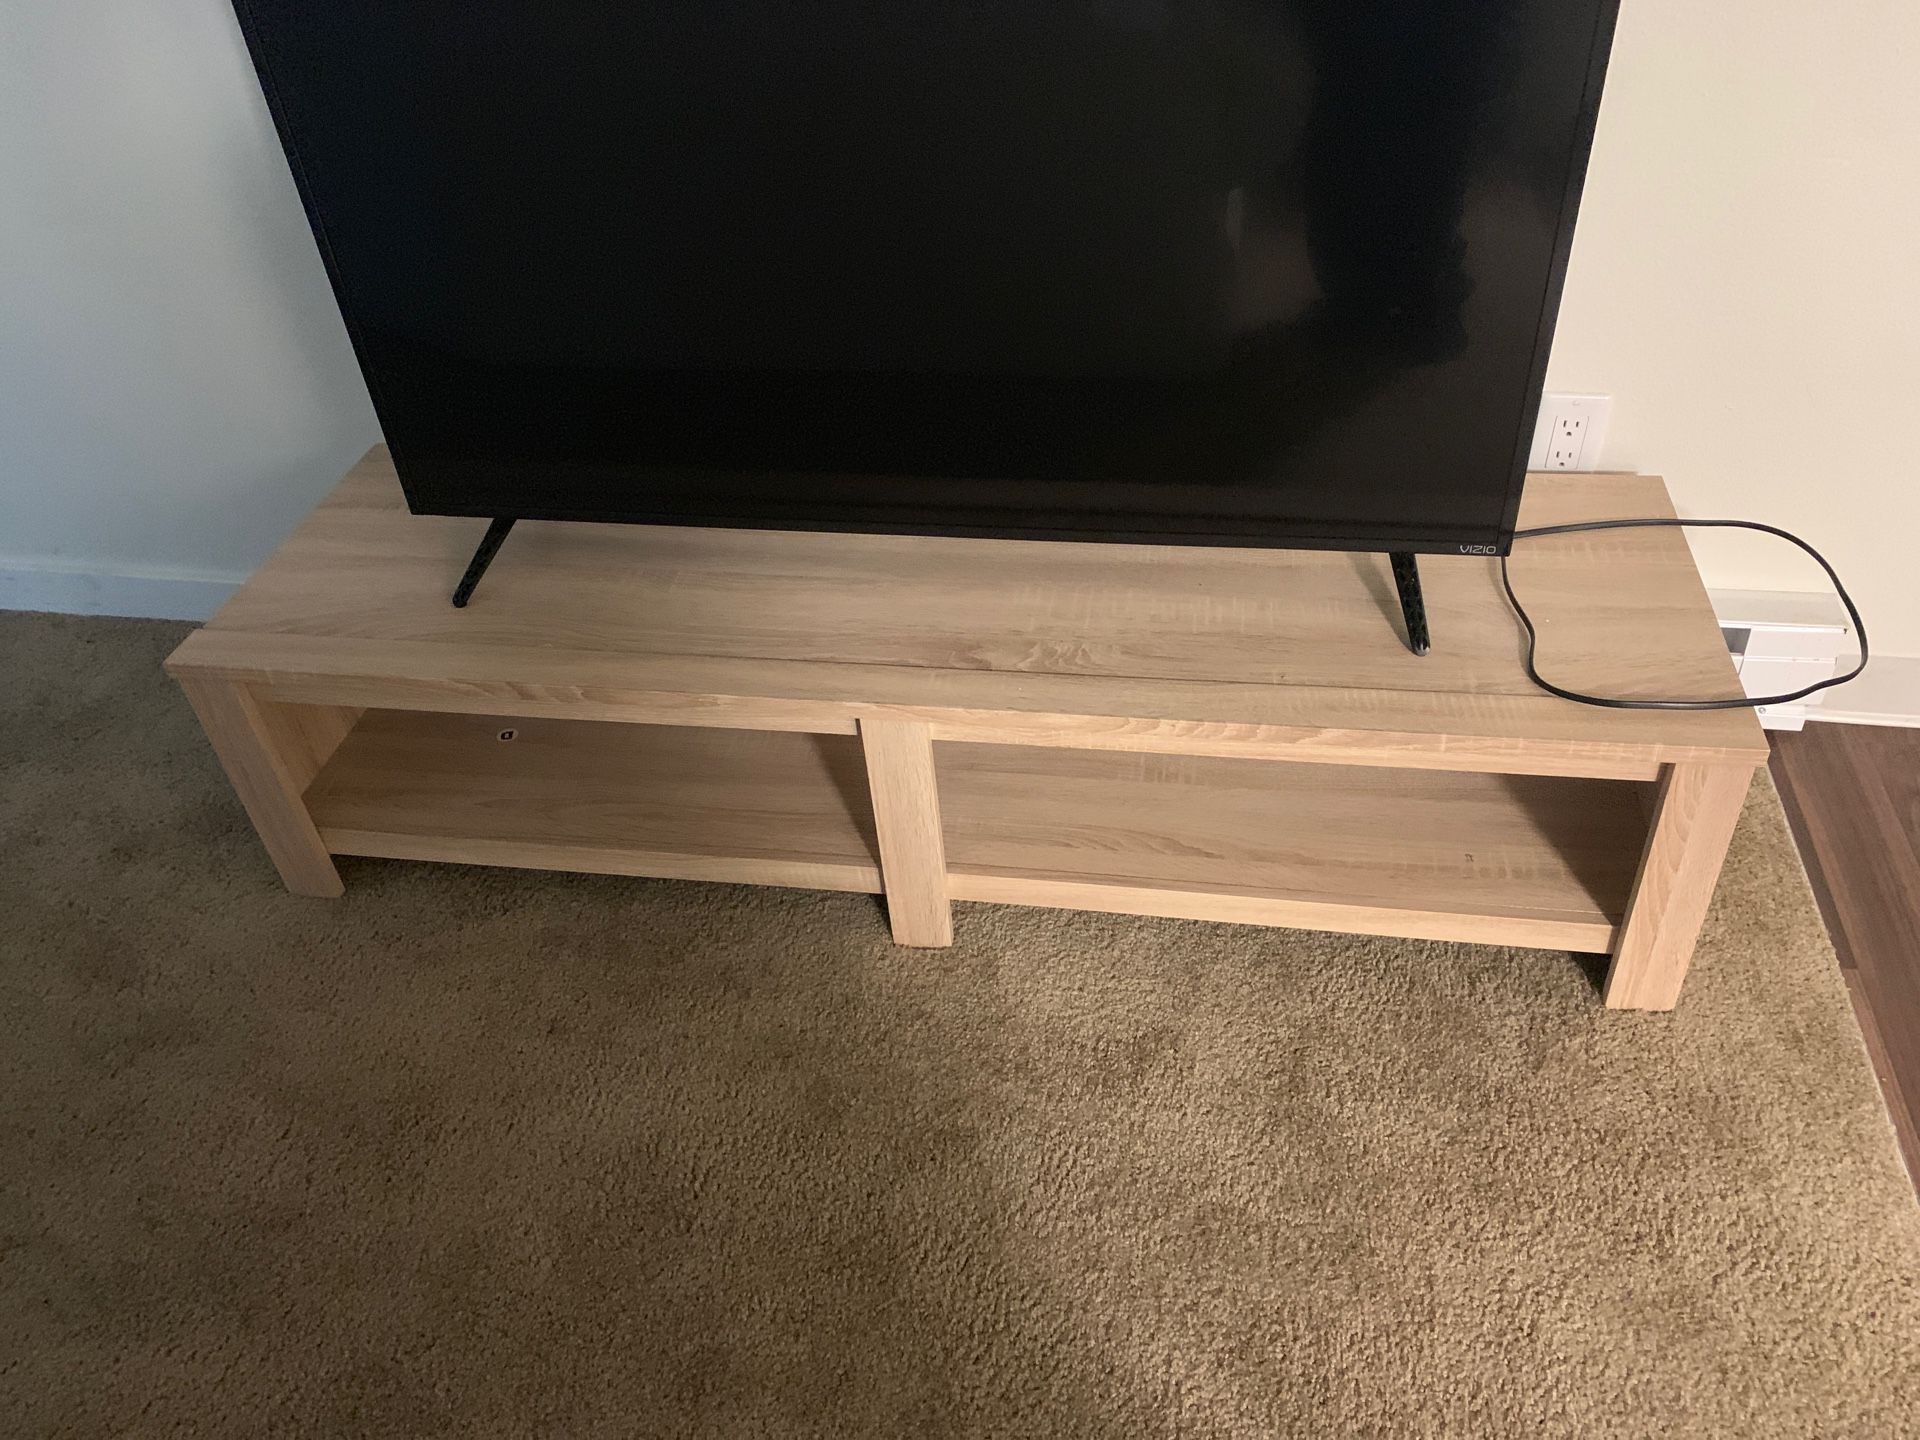 Tan 75 inch tv stand